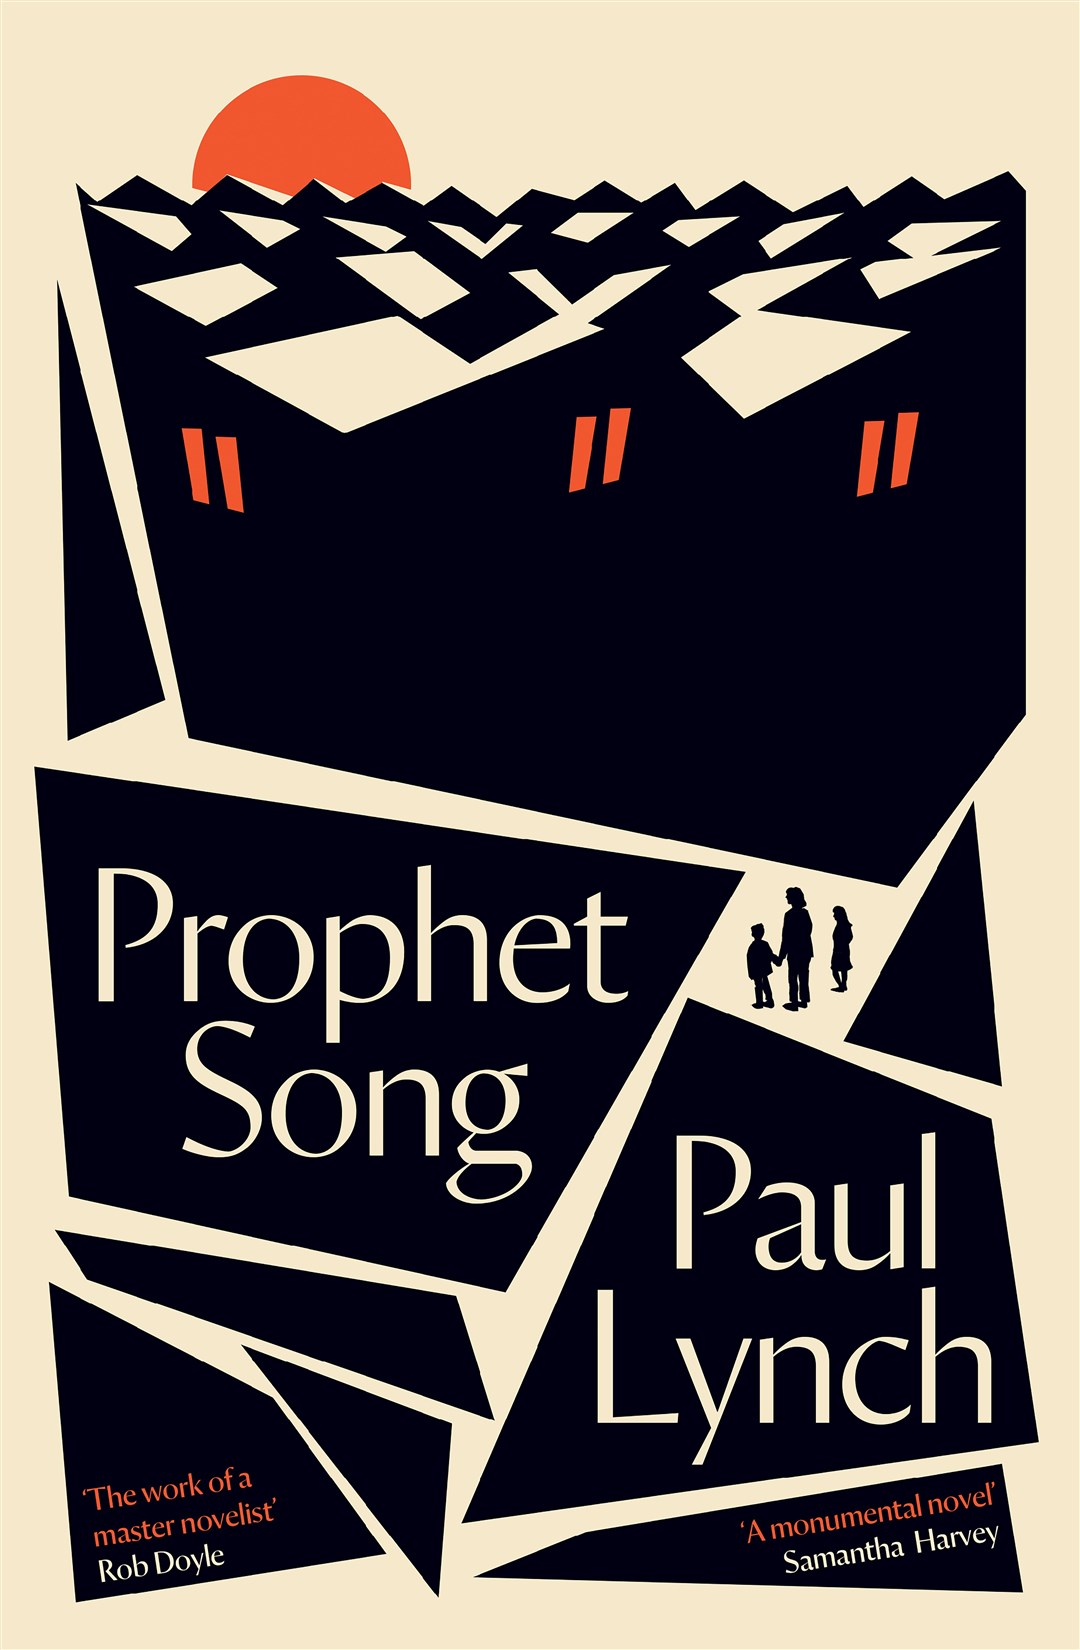 Prophet Song is a tale of a tyrannical government (Oneworld/PA)